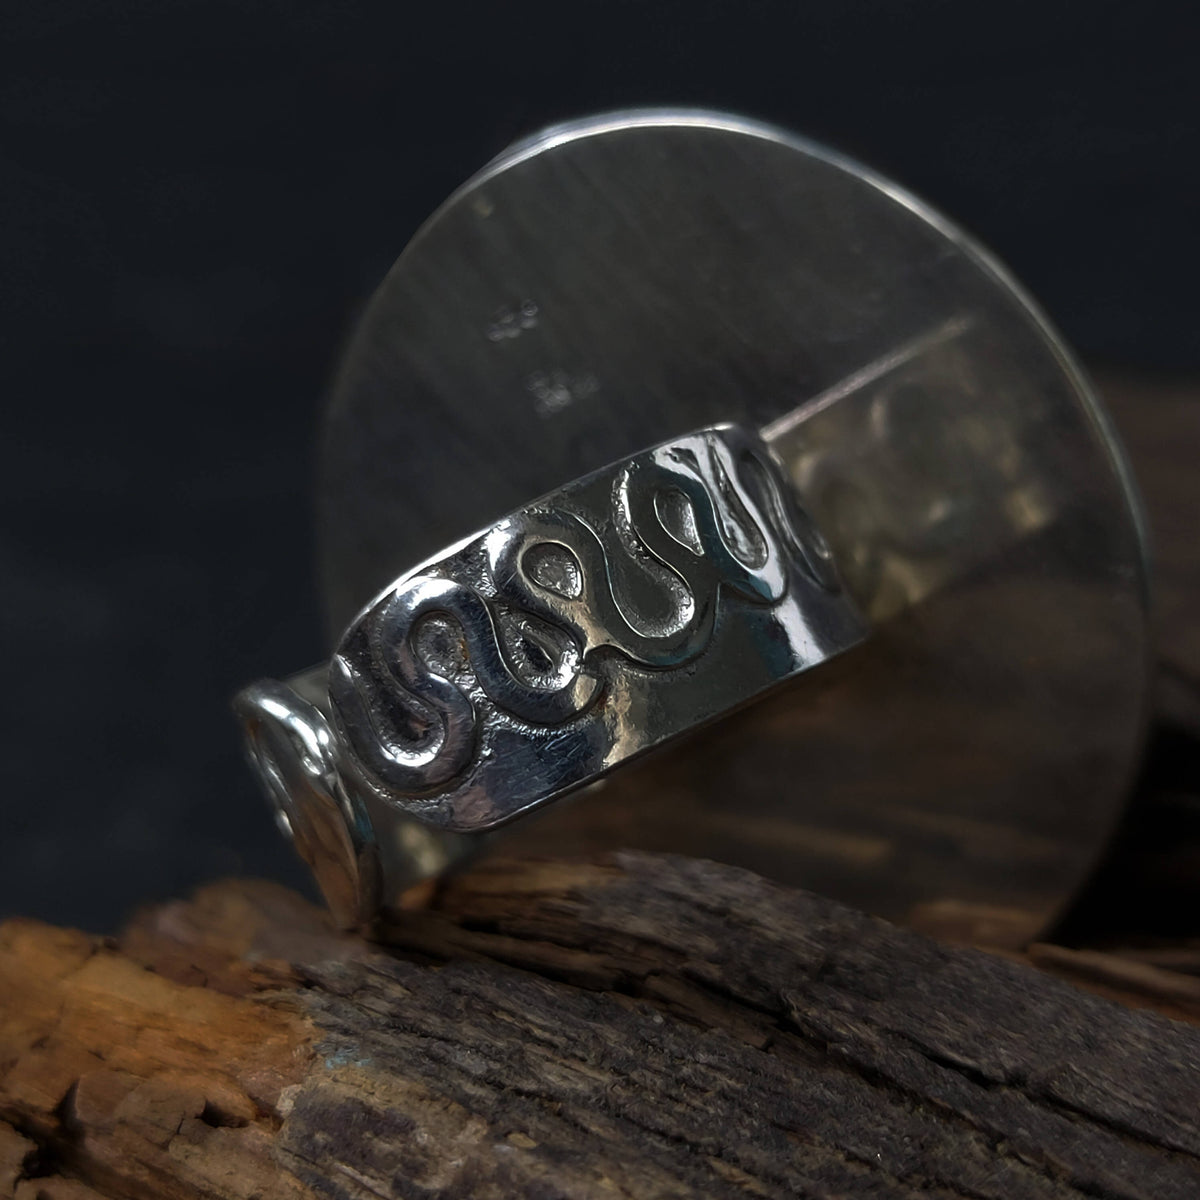 wavy lines and textures copying the pattern of the gemstone, adjustable ring, handmade by roff